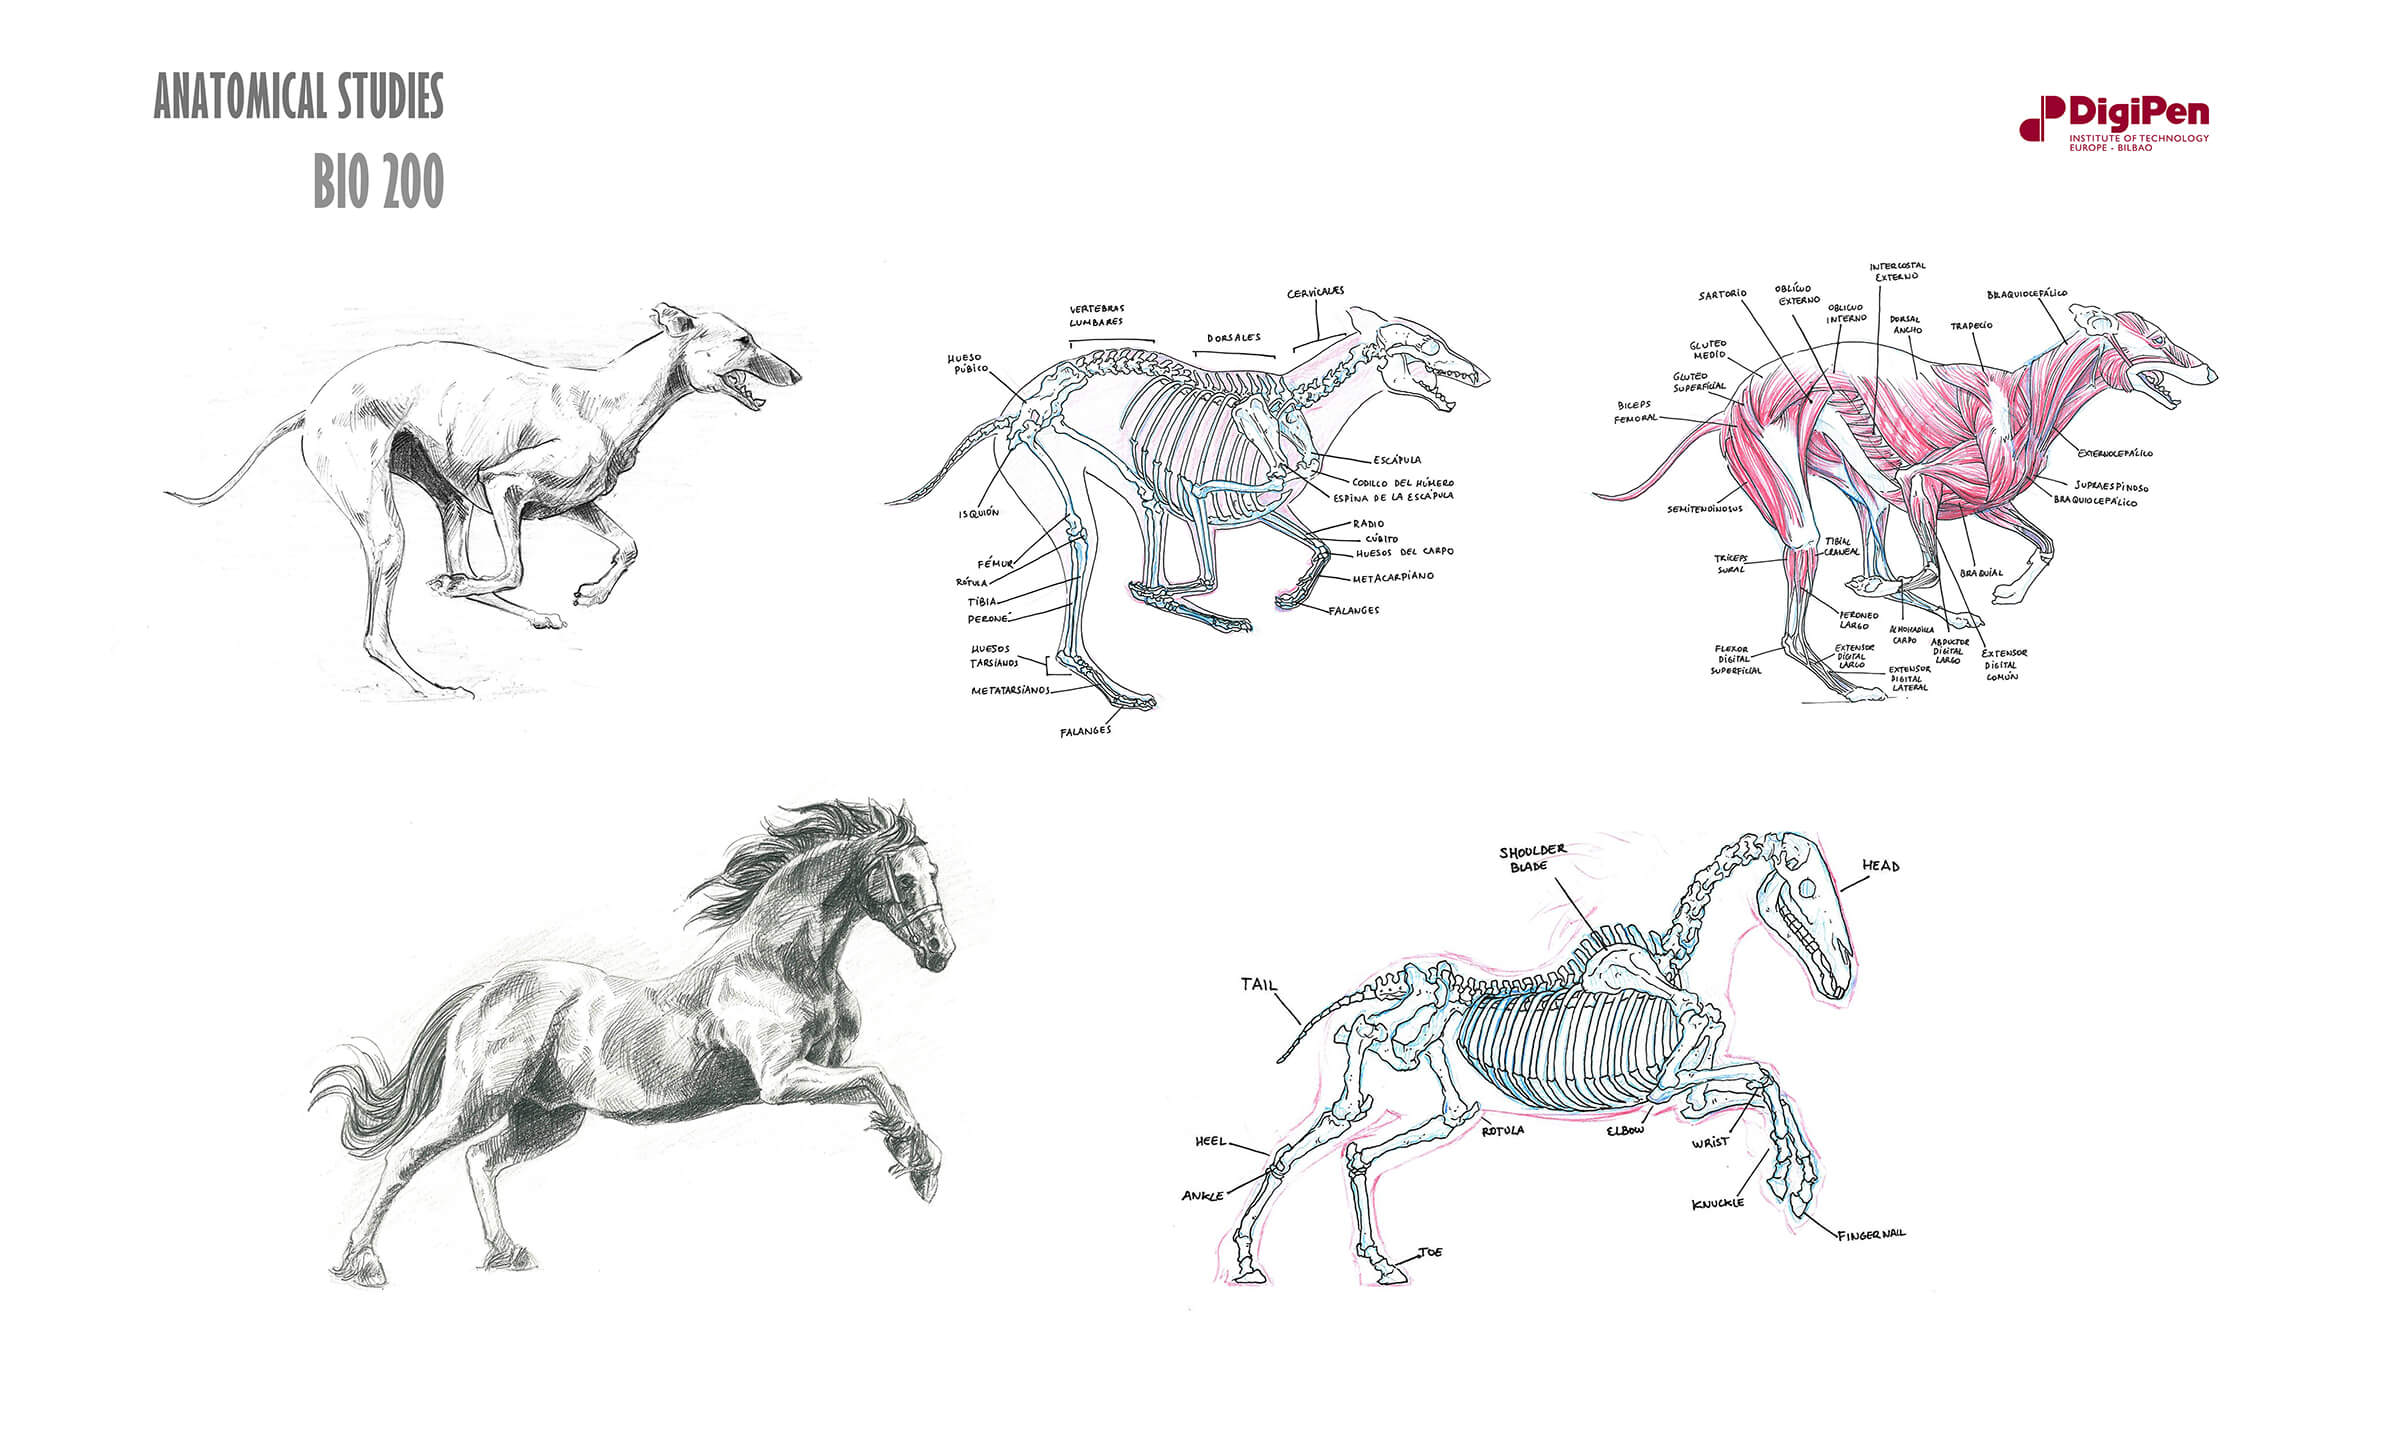 Black-and-white sketches of a dog and horse mid-run/gallop and cross-sections of their skeletal and muscular systems.